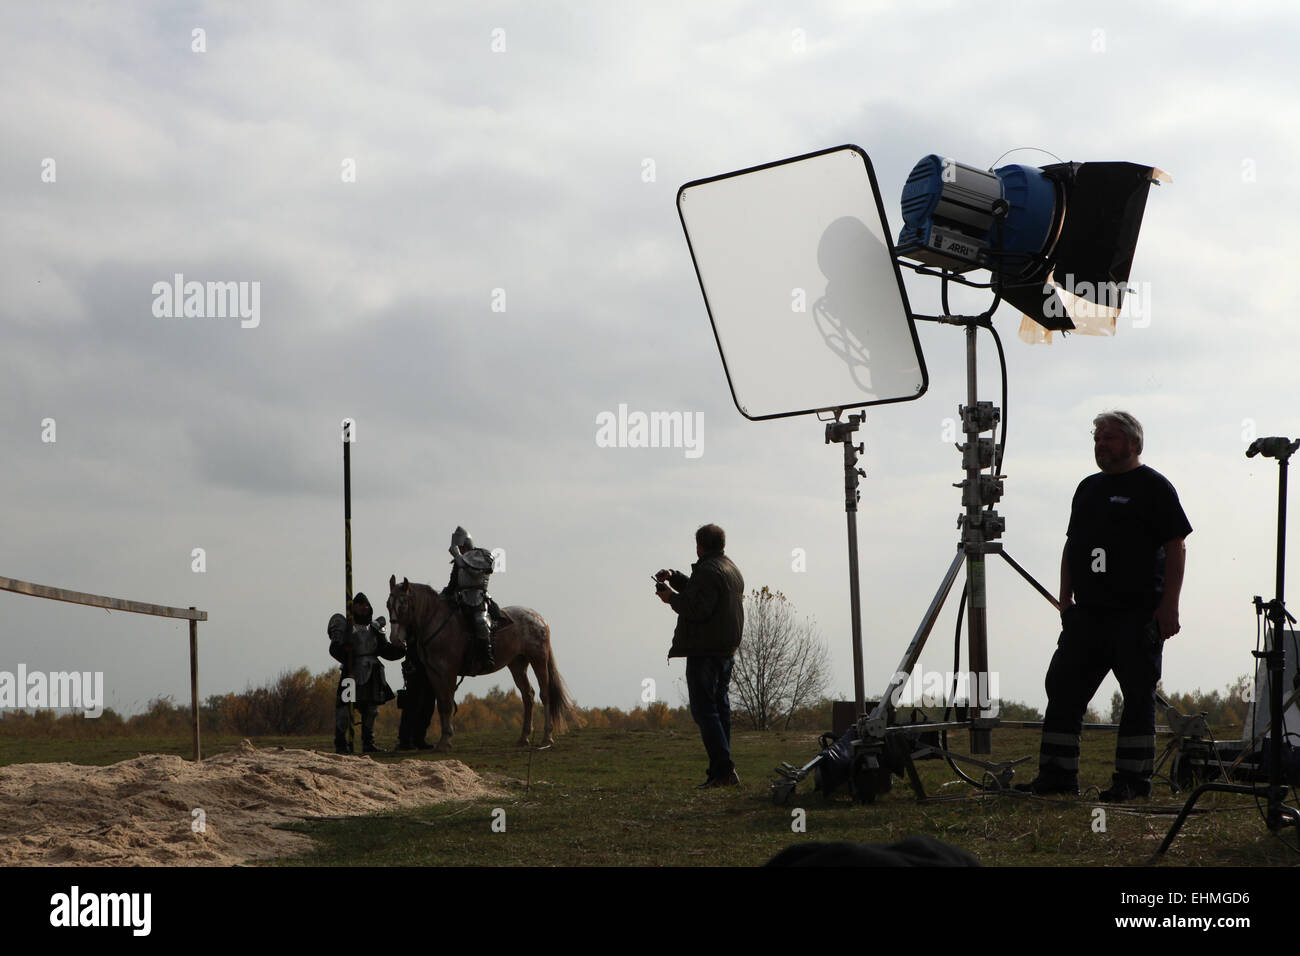 Actor dressed as a medieval knight rides a horse during the filming of the new German film 'Die Ritter' ('The Knights') directed by Carsten Gutschmidt by order of ZDF in Milovice in Central Bohemia, Czech Republic in 23 October 2013. Stock Photo